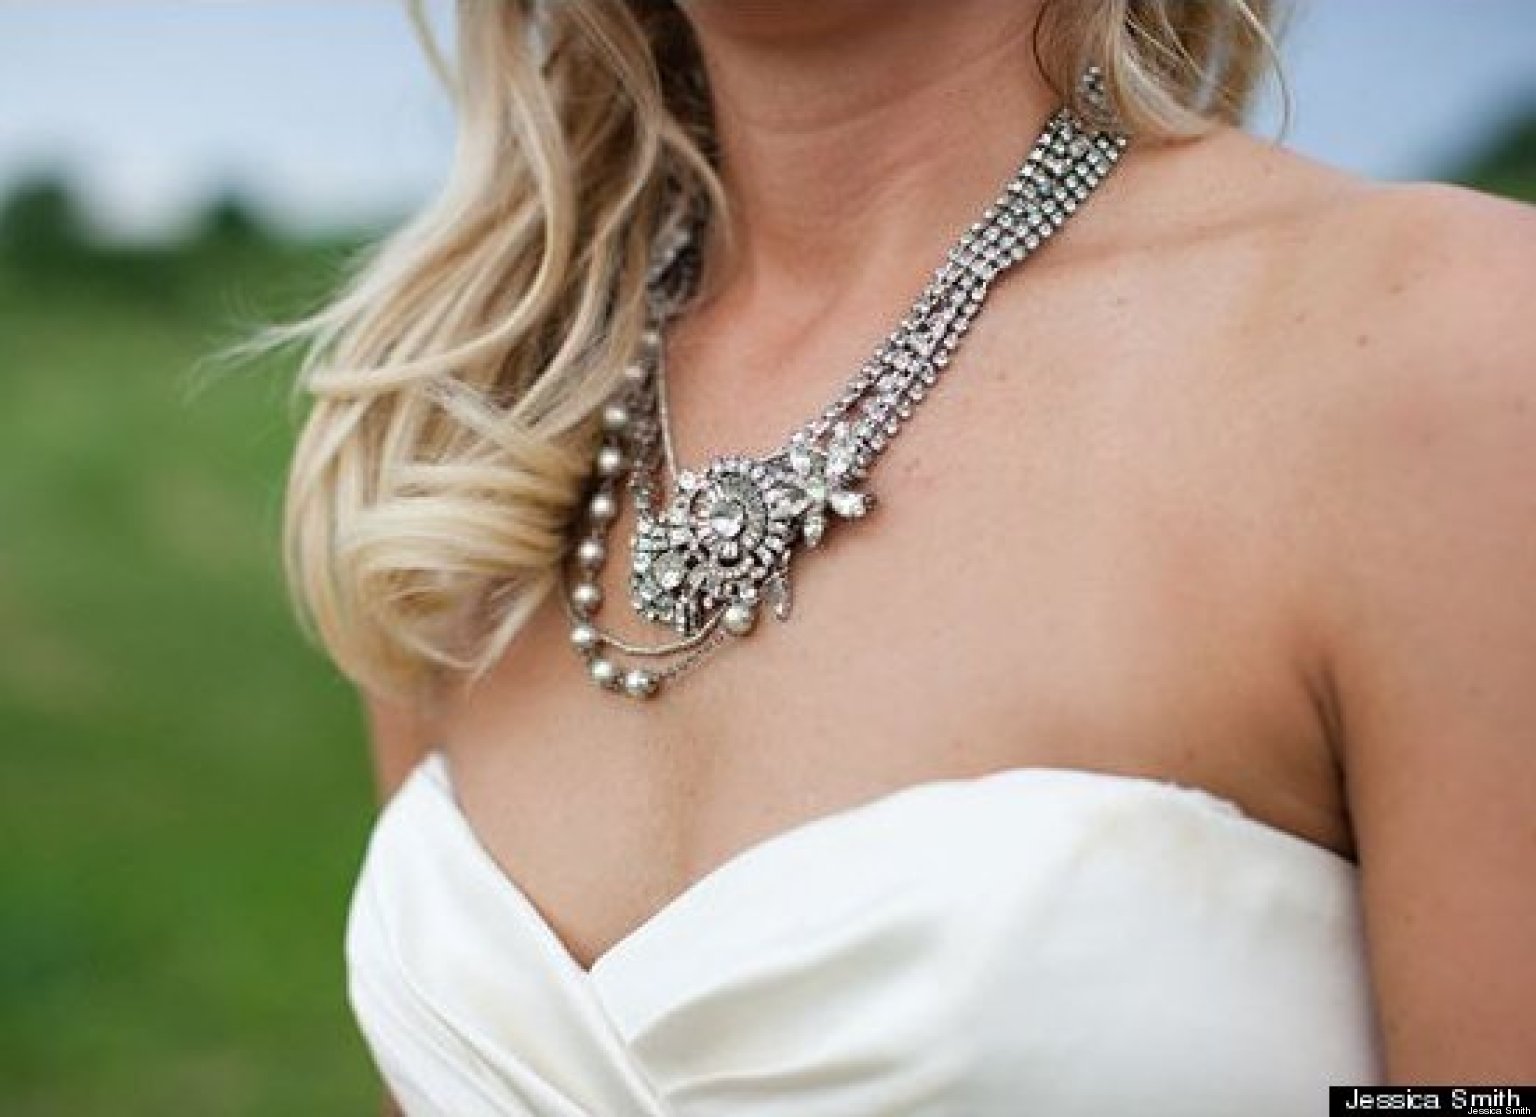 Diy Wedding Necklace A Step By Step Guide Huffpost